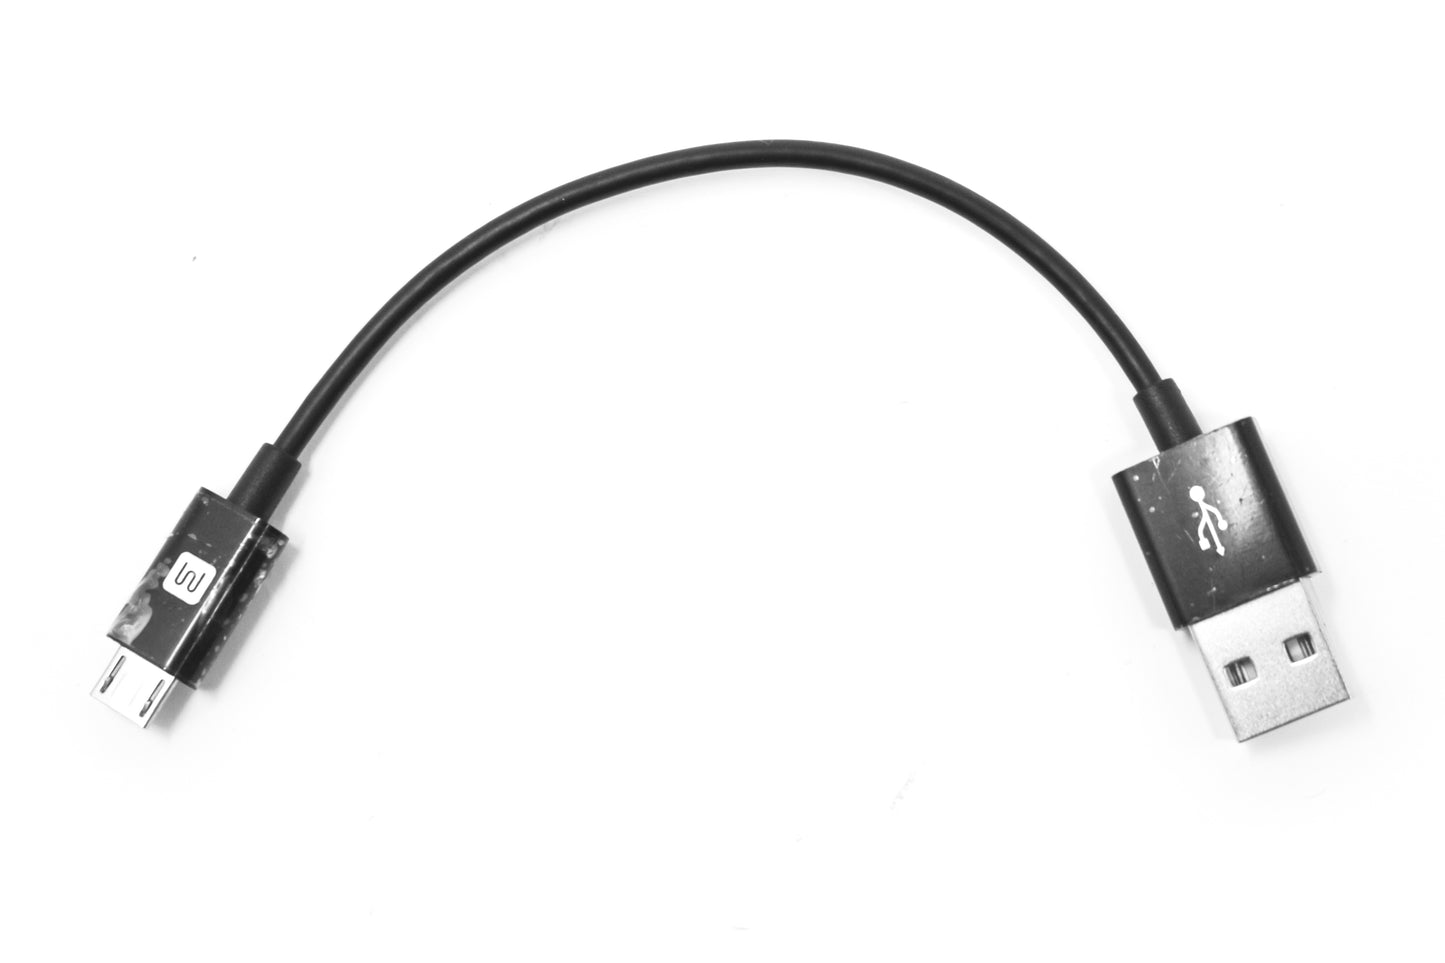 USB A to Micro B Cable, 6"